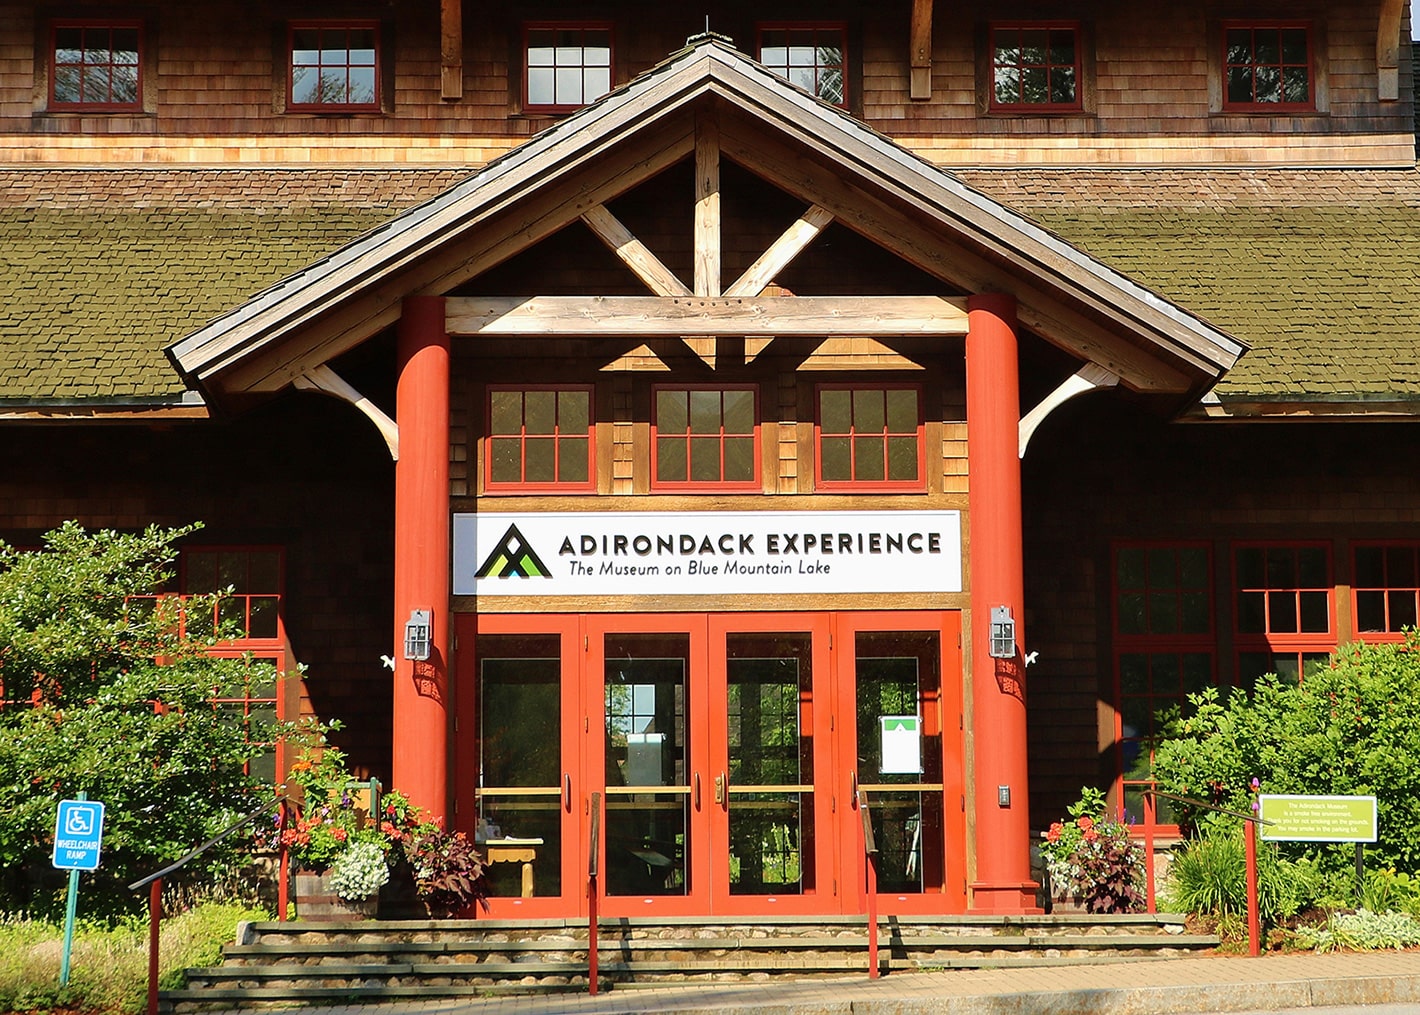 An image of the front entrance to the Adirondack Experience.